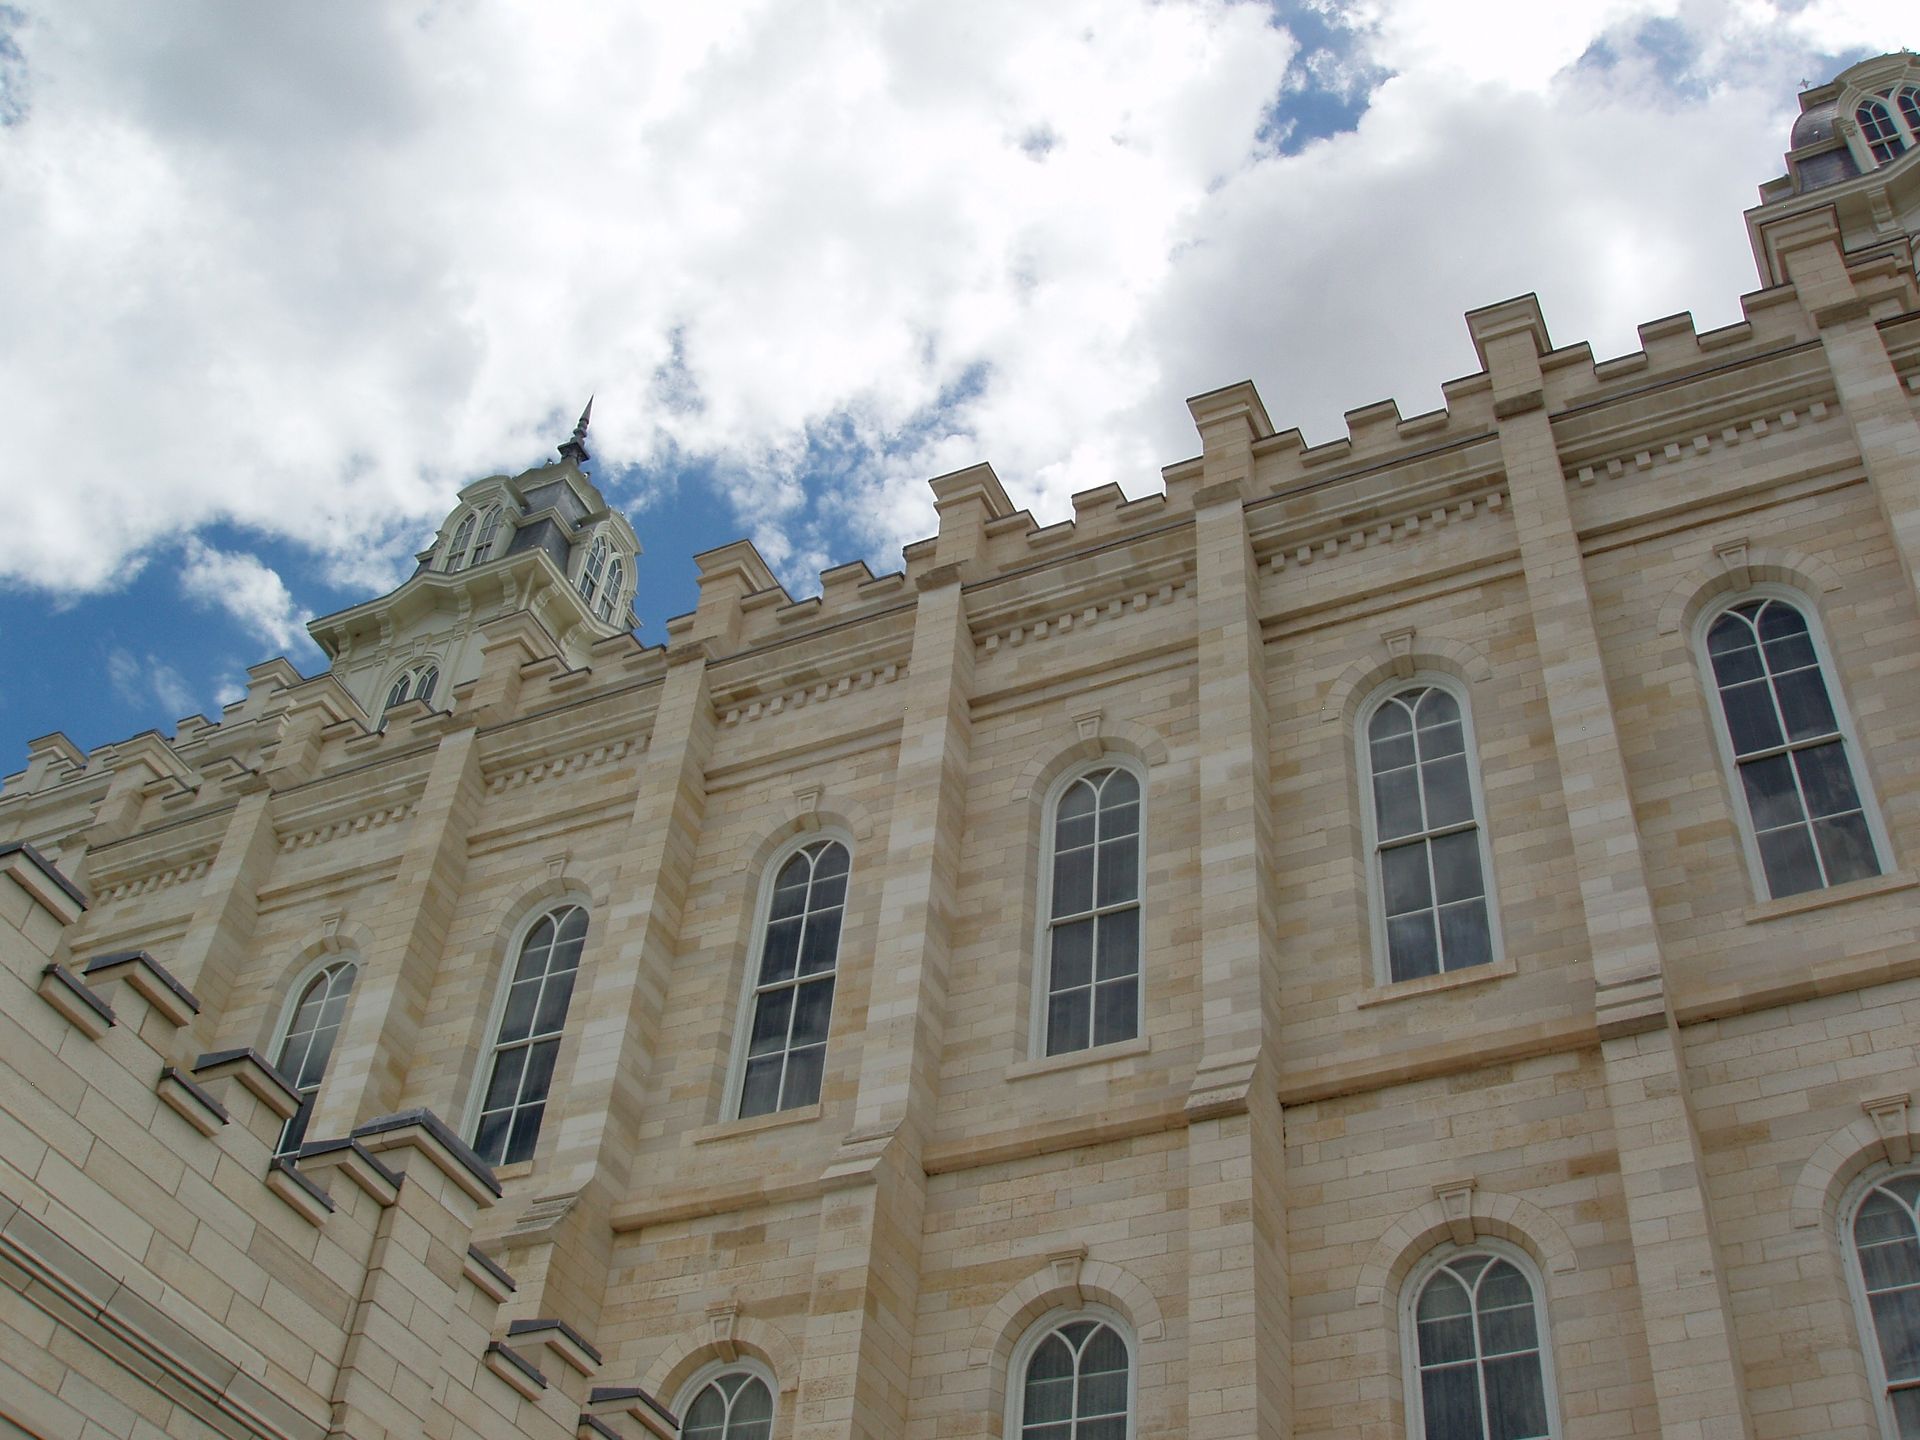 The Manti Utah Temple exterior, including windows and spires.